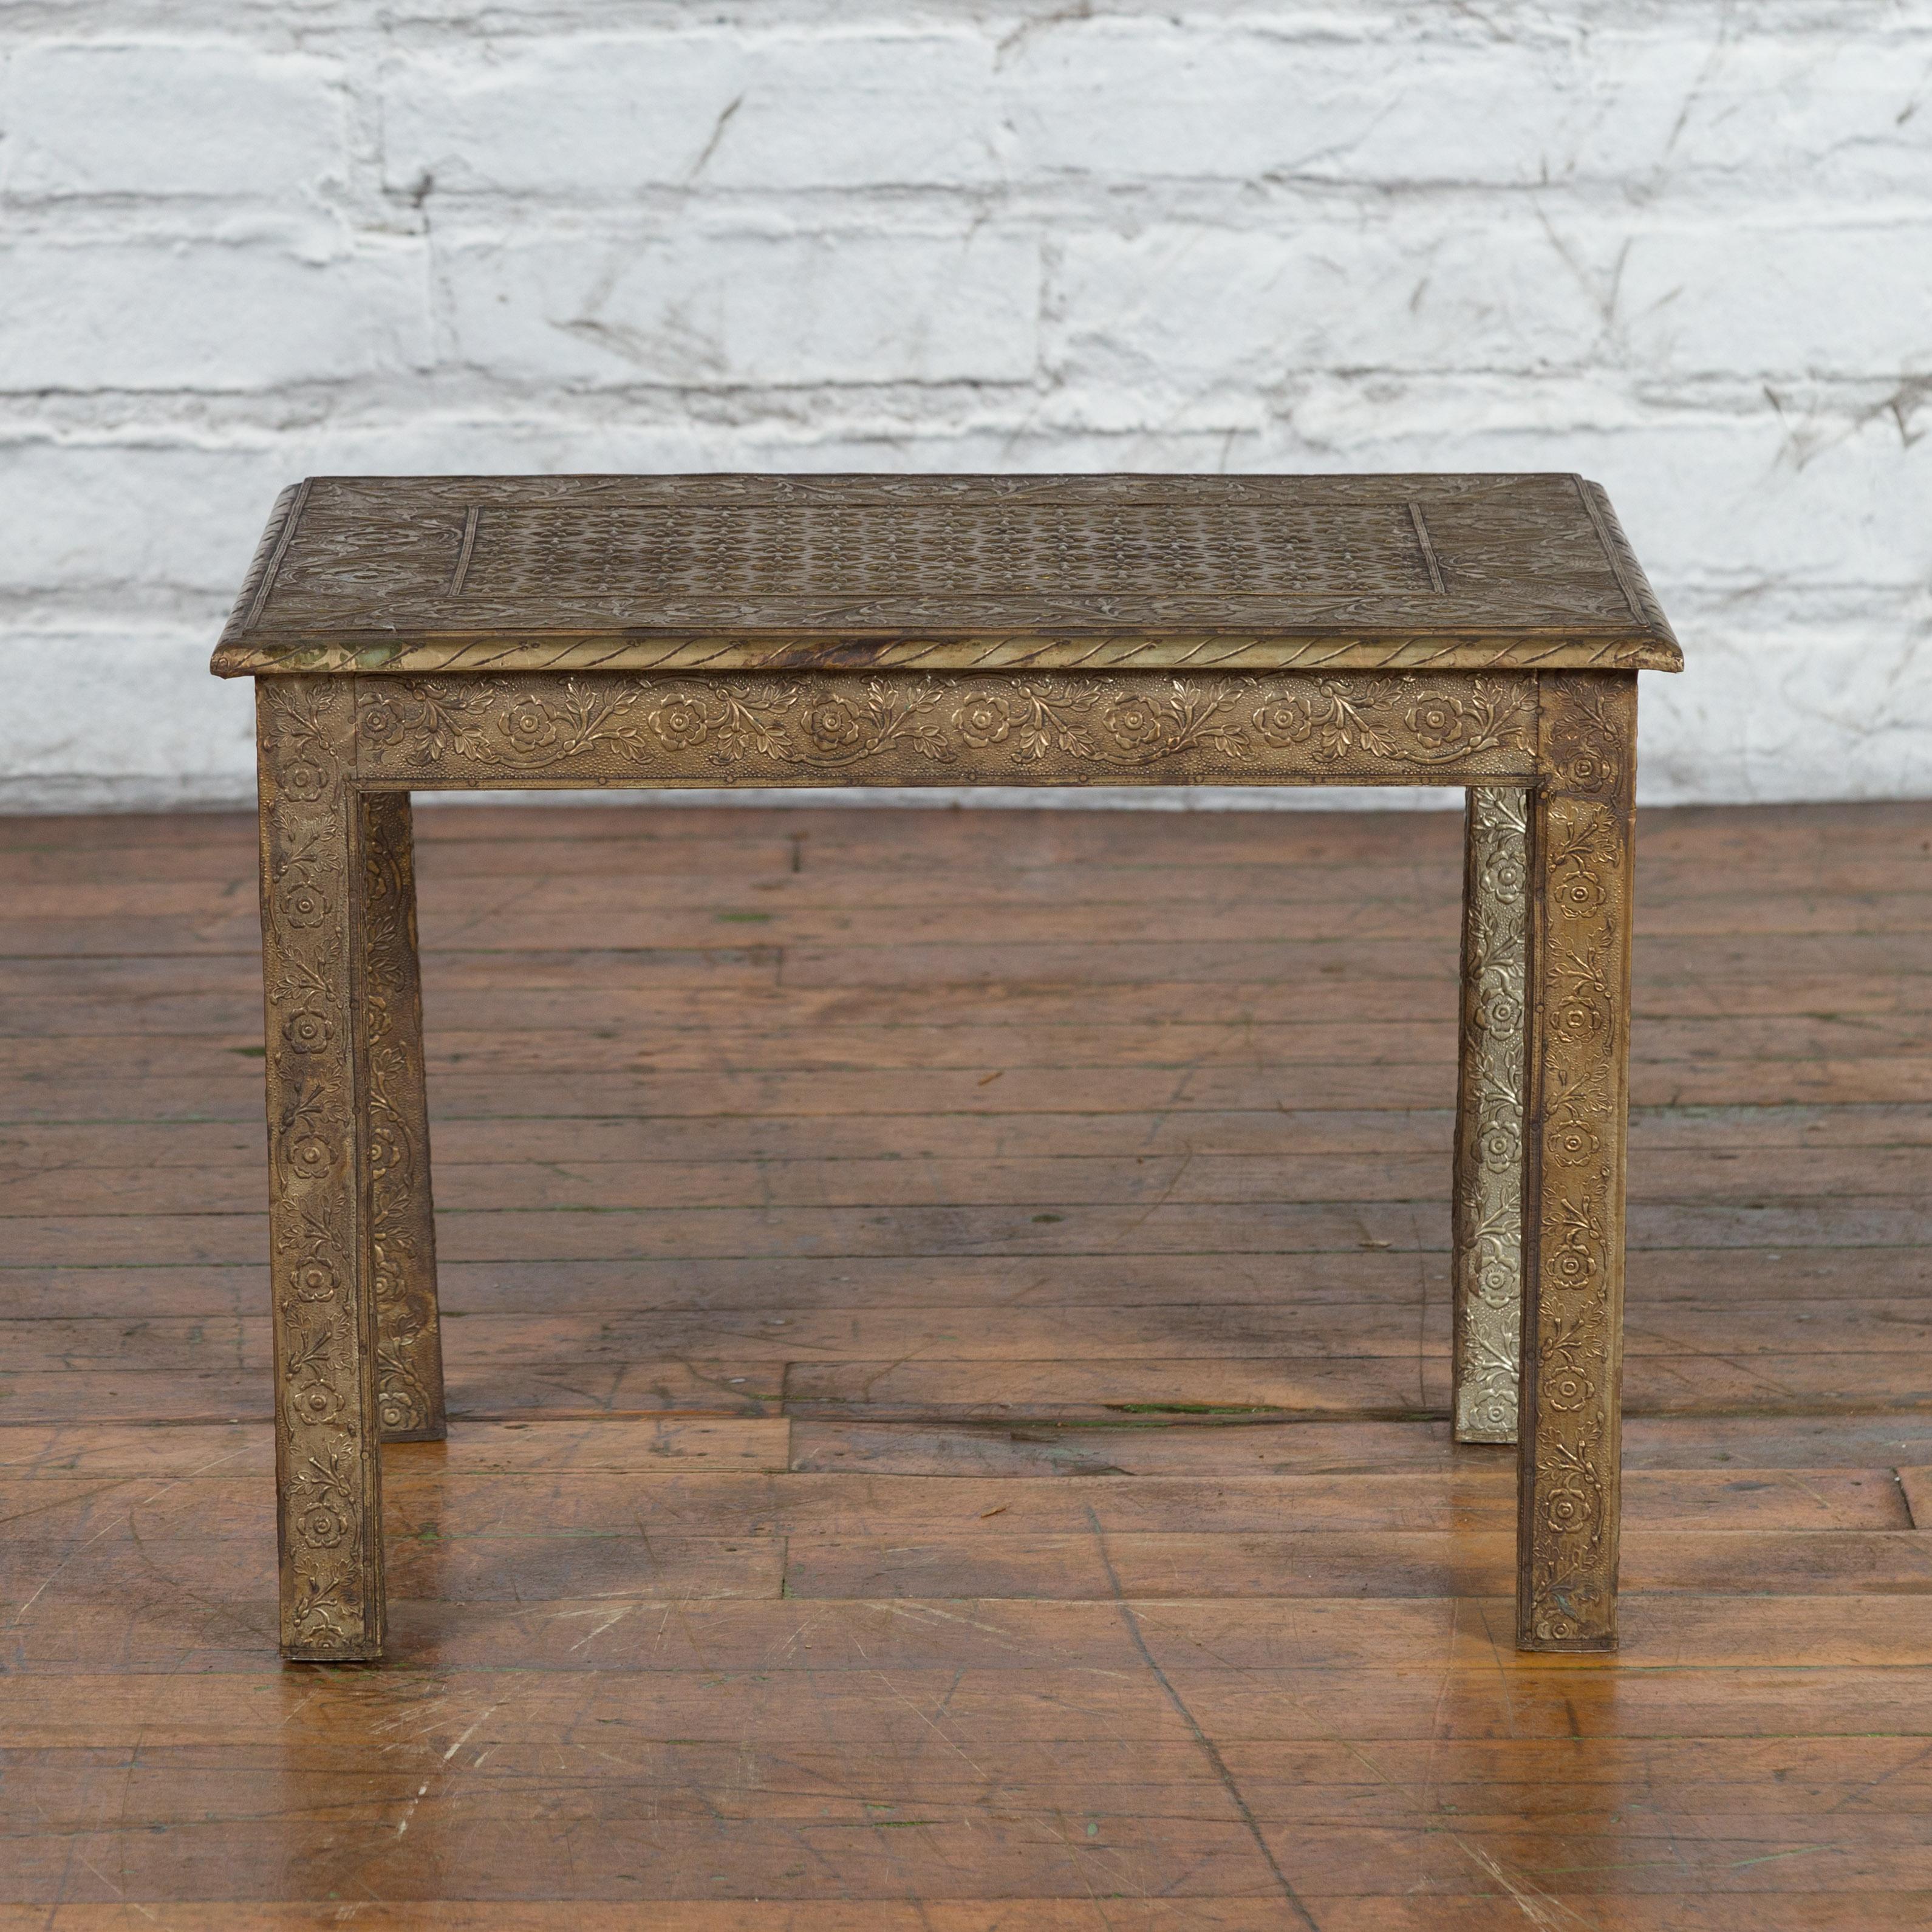 A vintage Indian low side table from the mid 20th century with repoussé floral motifs, nickel and silver finish, straight legs and distressed patina. Created in India during the midcentury period, this low drinks table features a rectangular top